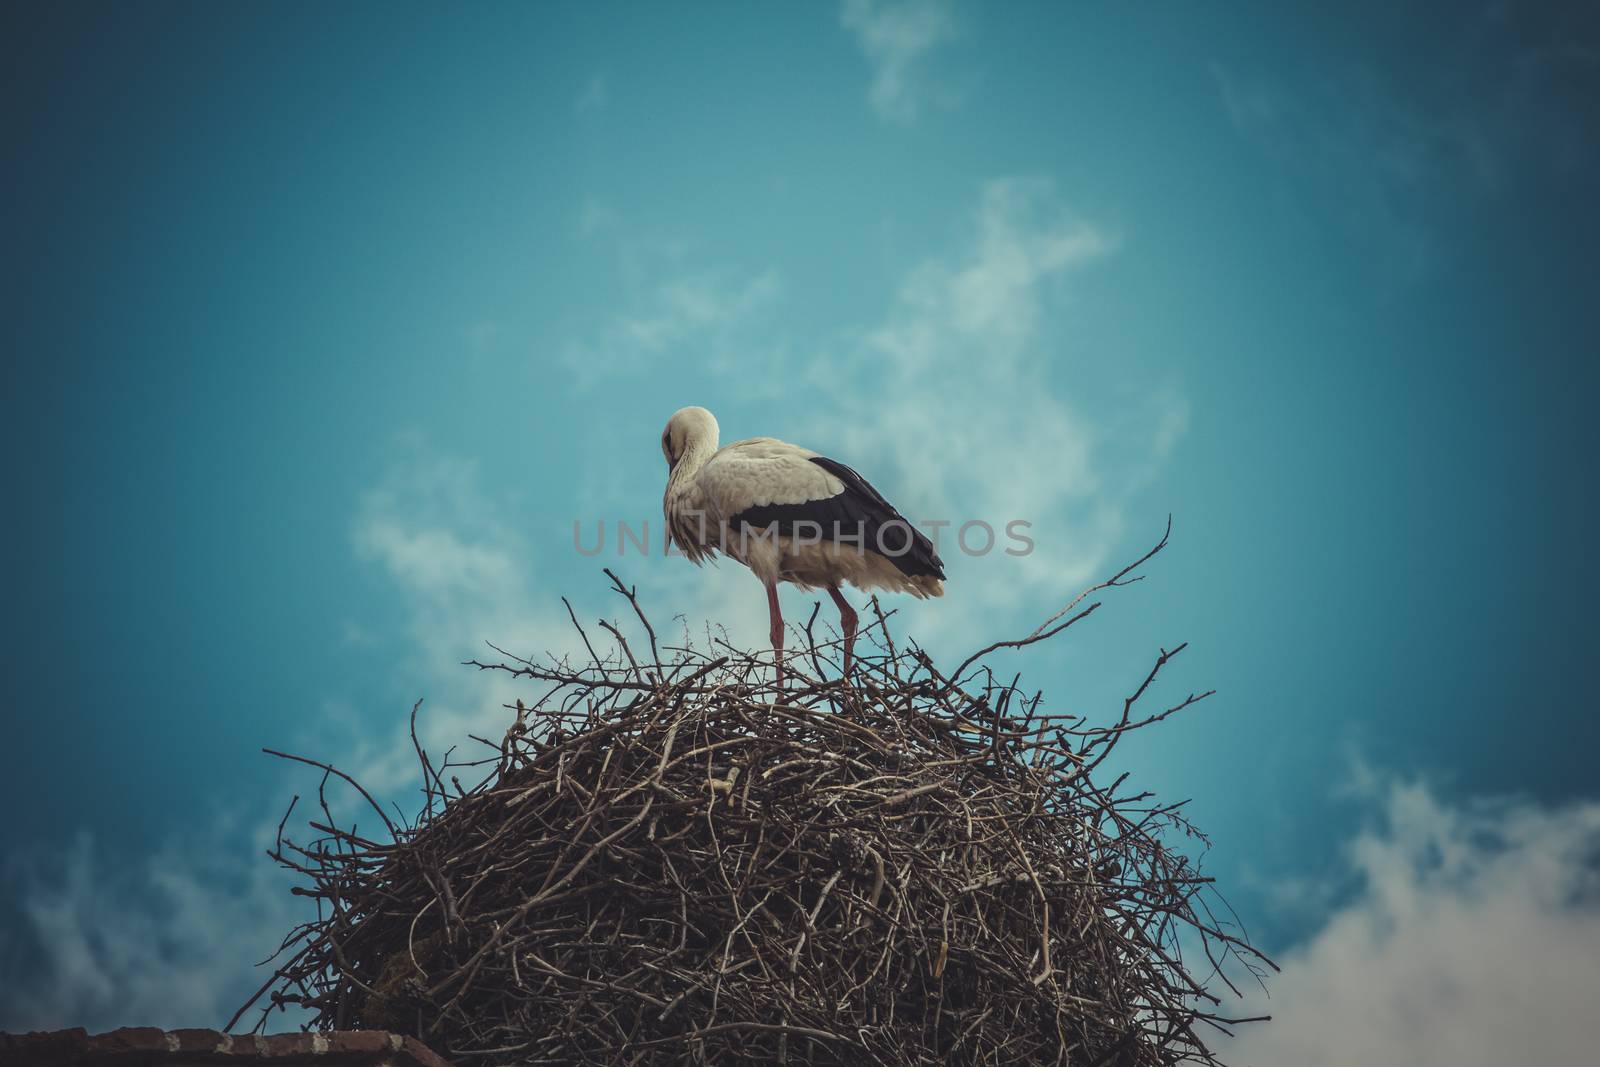 Summer, Stork nest made ������of tree branches over blue sky in by FernandoCortes